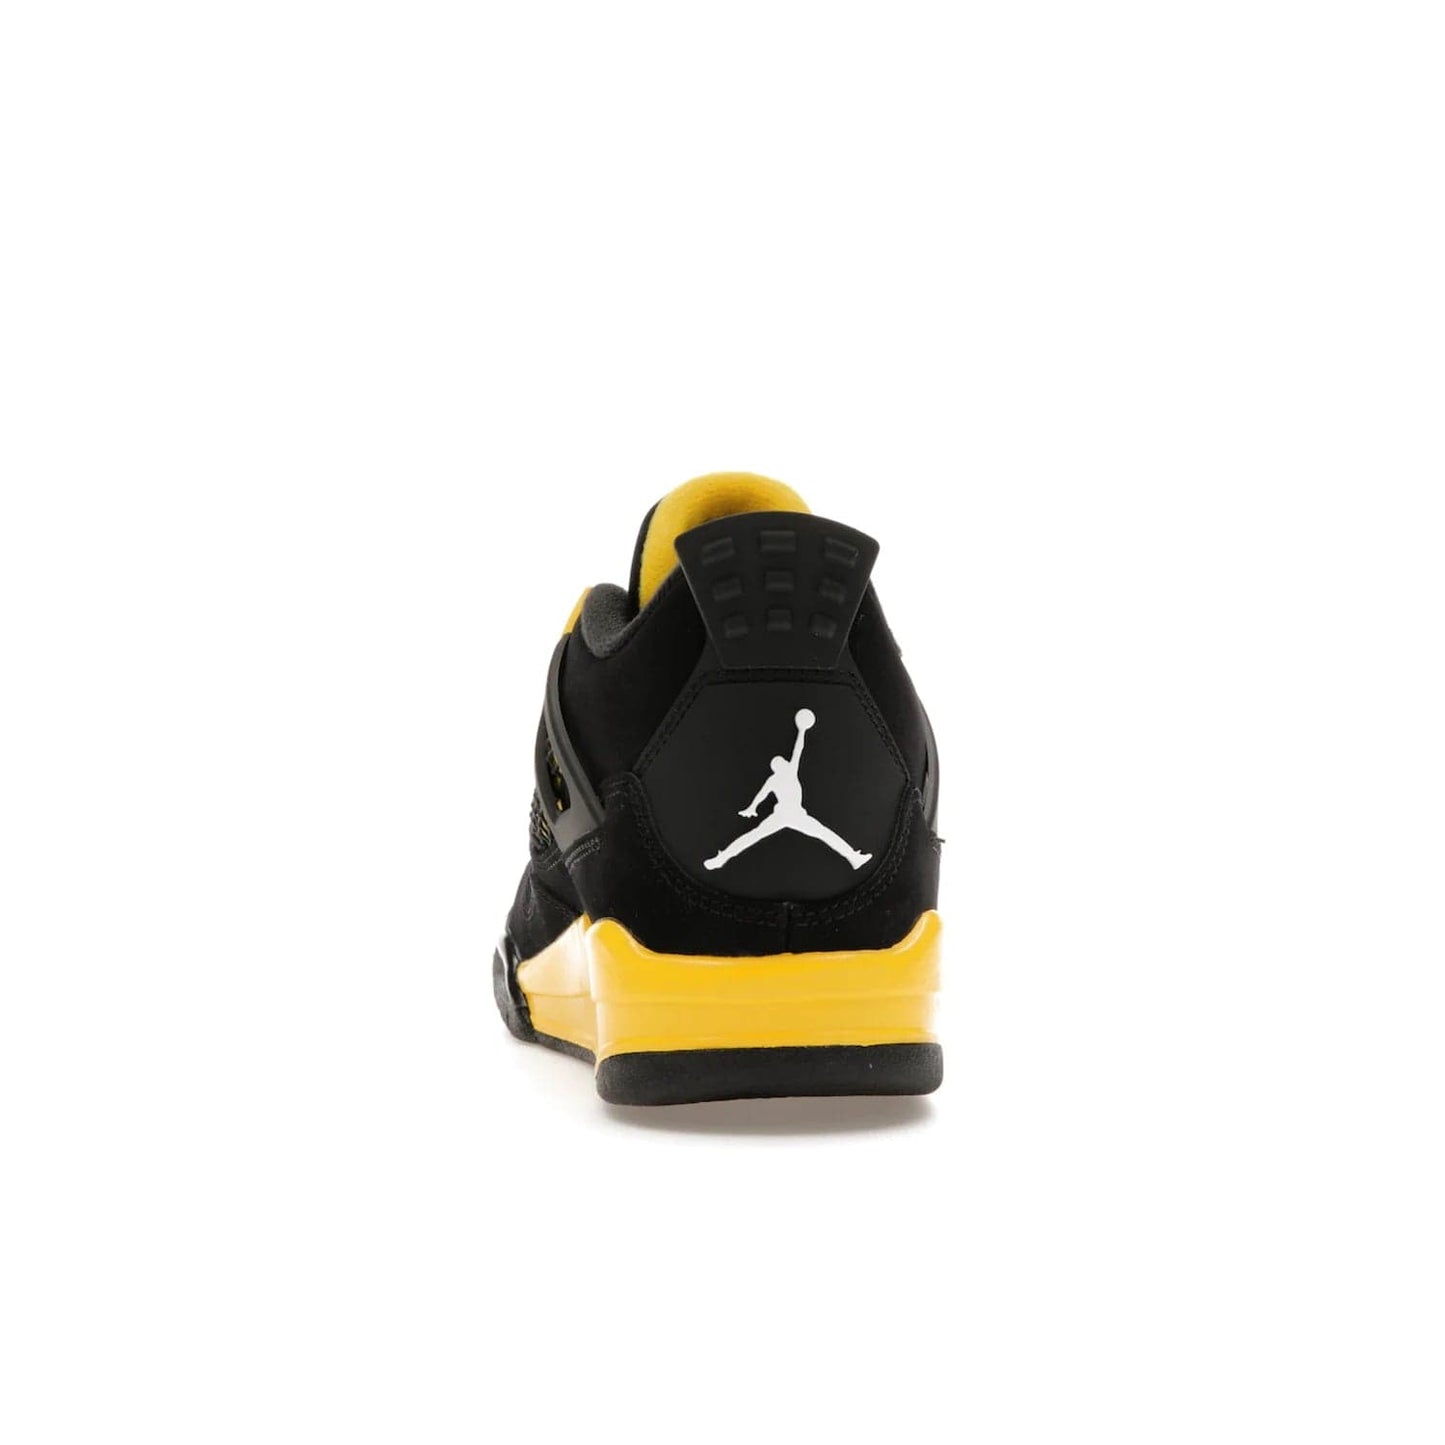 Jordan 4 Retro Thunder (2023) (GS) - Image 27 - Only at www.BallersClubKickz.com - Introducing the iconic Jordan 4 Retro Thunder from the 2023 collection! Sleek black and Tour Yellow detailing. Signature Jordan tongue tab. Mesmerizing design for sneaker collectors. Get yours now!